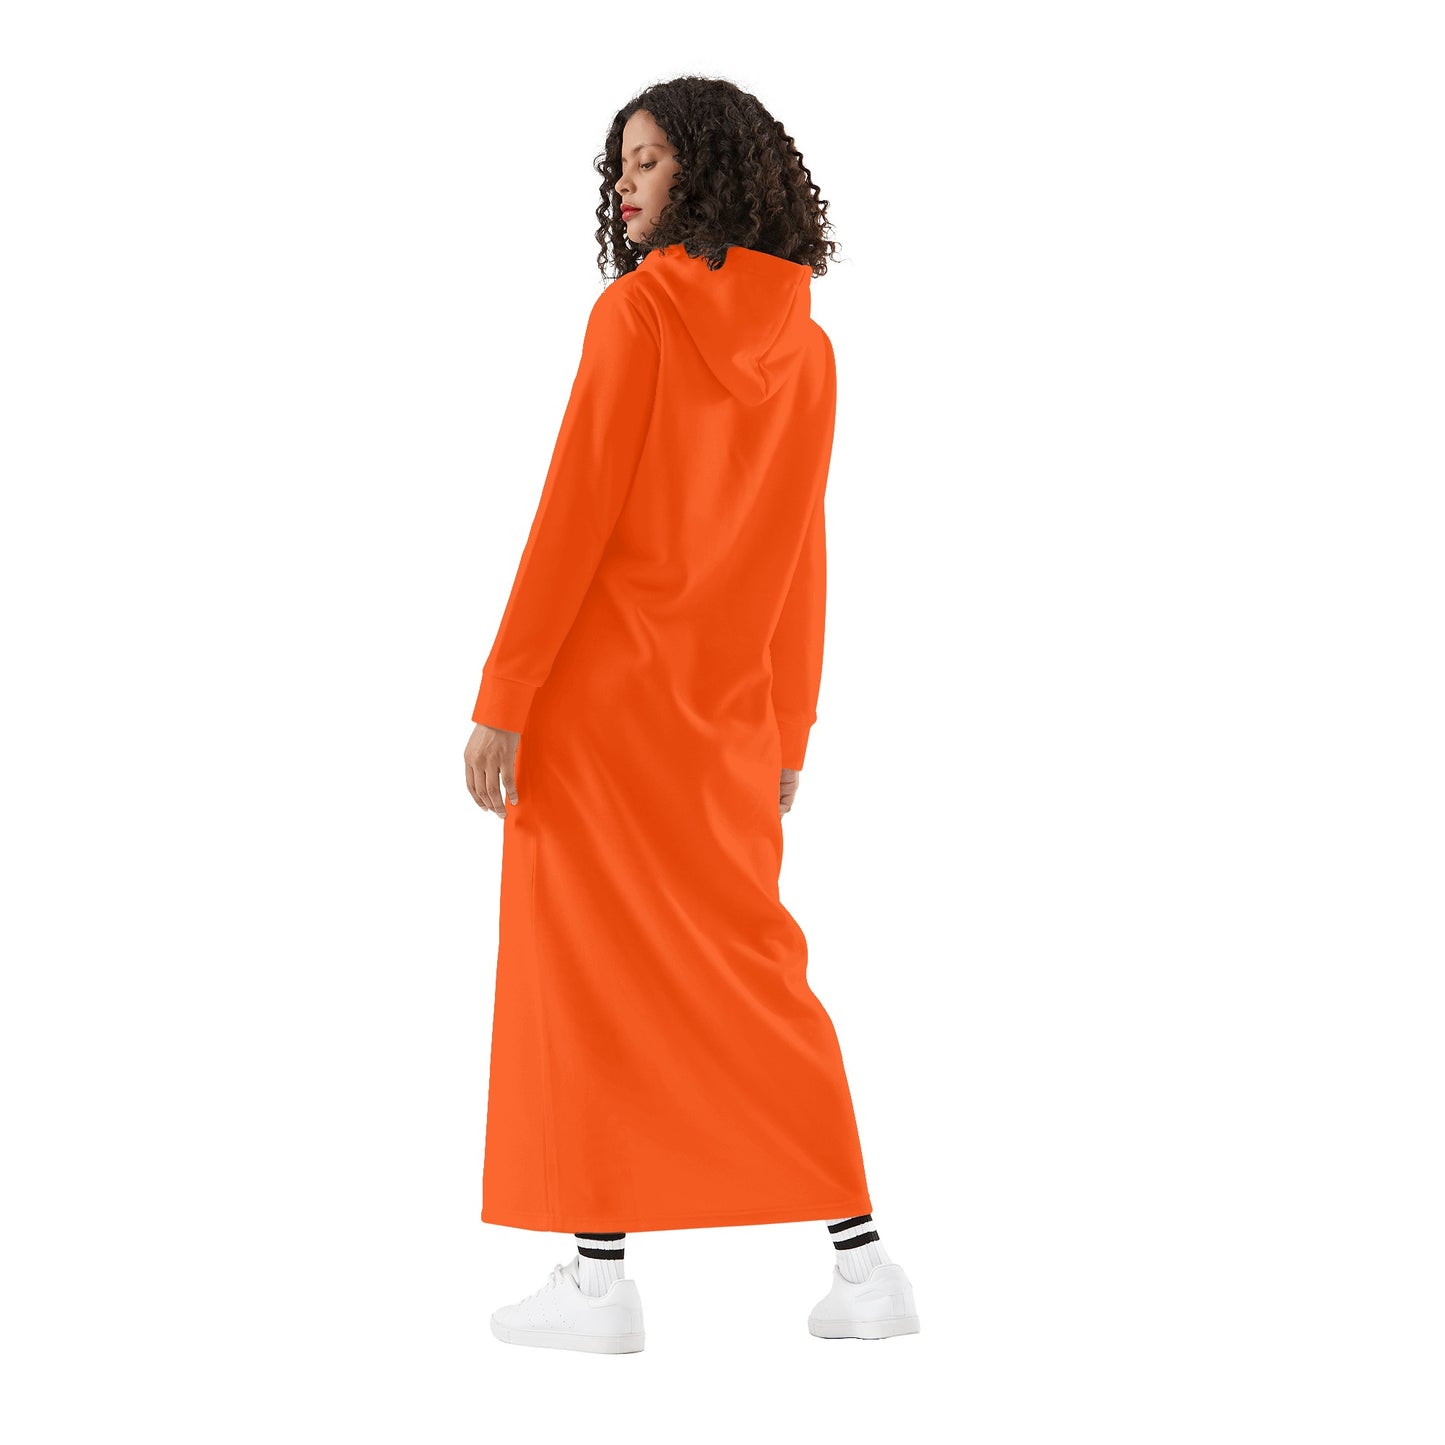 T4x Faith with Blessing Womens Long Hoodie Dress